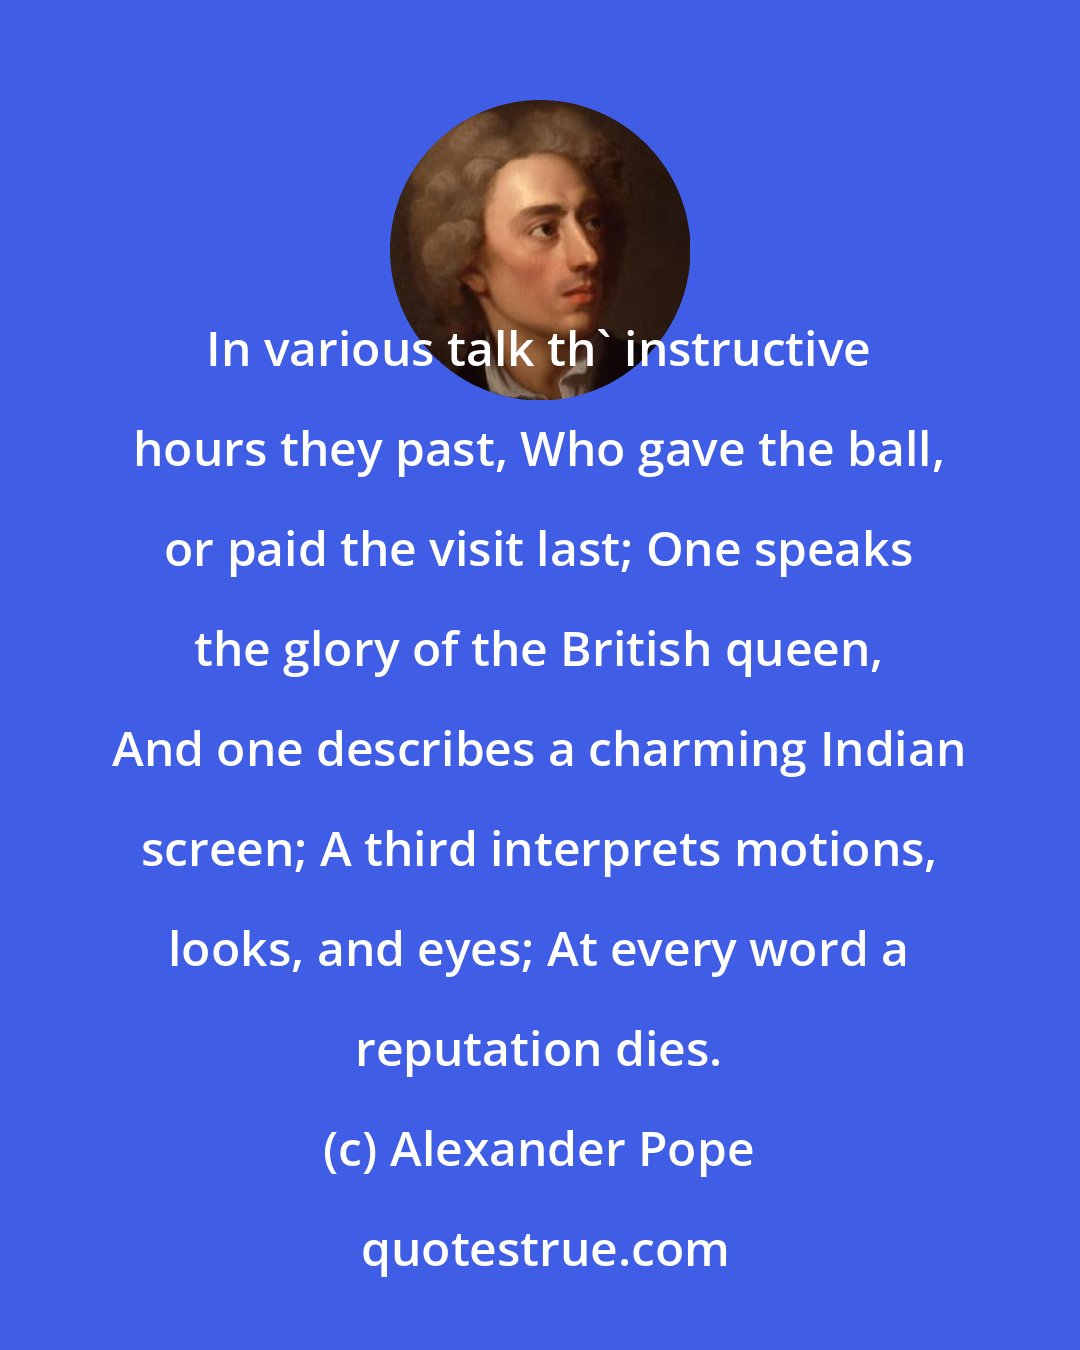 Alexander Pope: In various talk th' instructive hours they past, Who gave the ball, or paid the visit last; One speaks the glory of the British queen, And one describes a charming Indian screen; A third interprets motions, looks, and eyes; At every word a reputation dies.